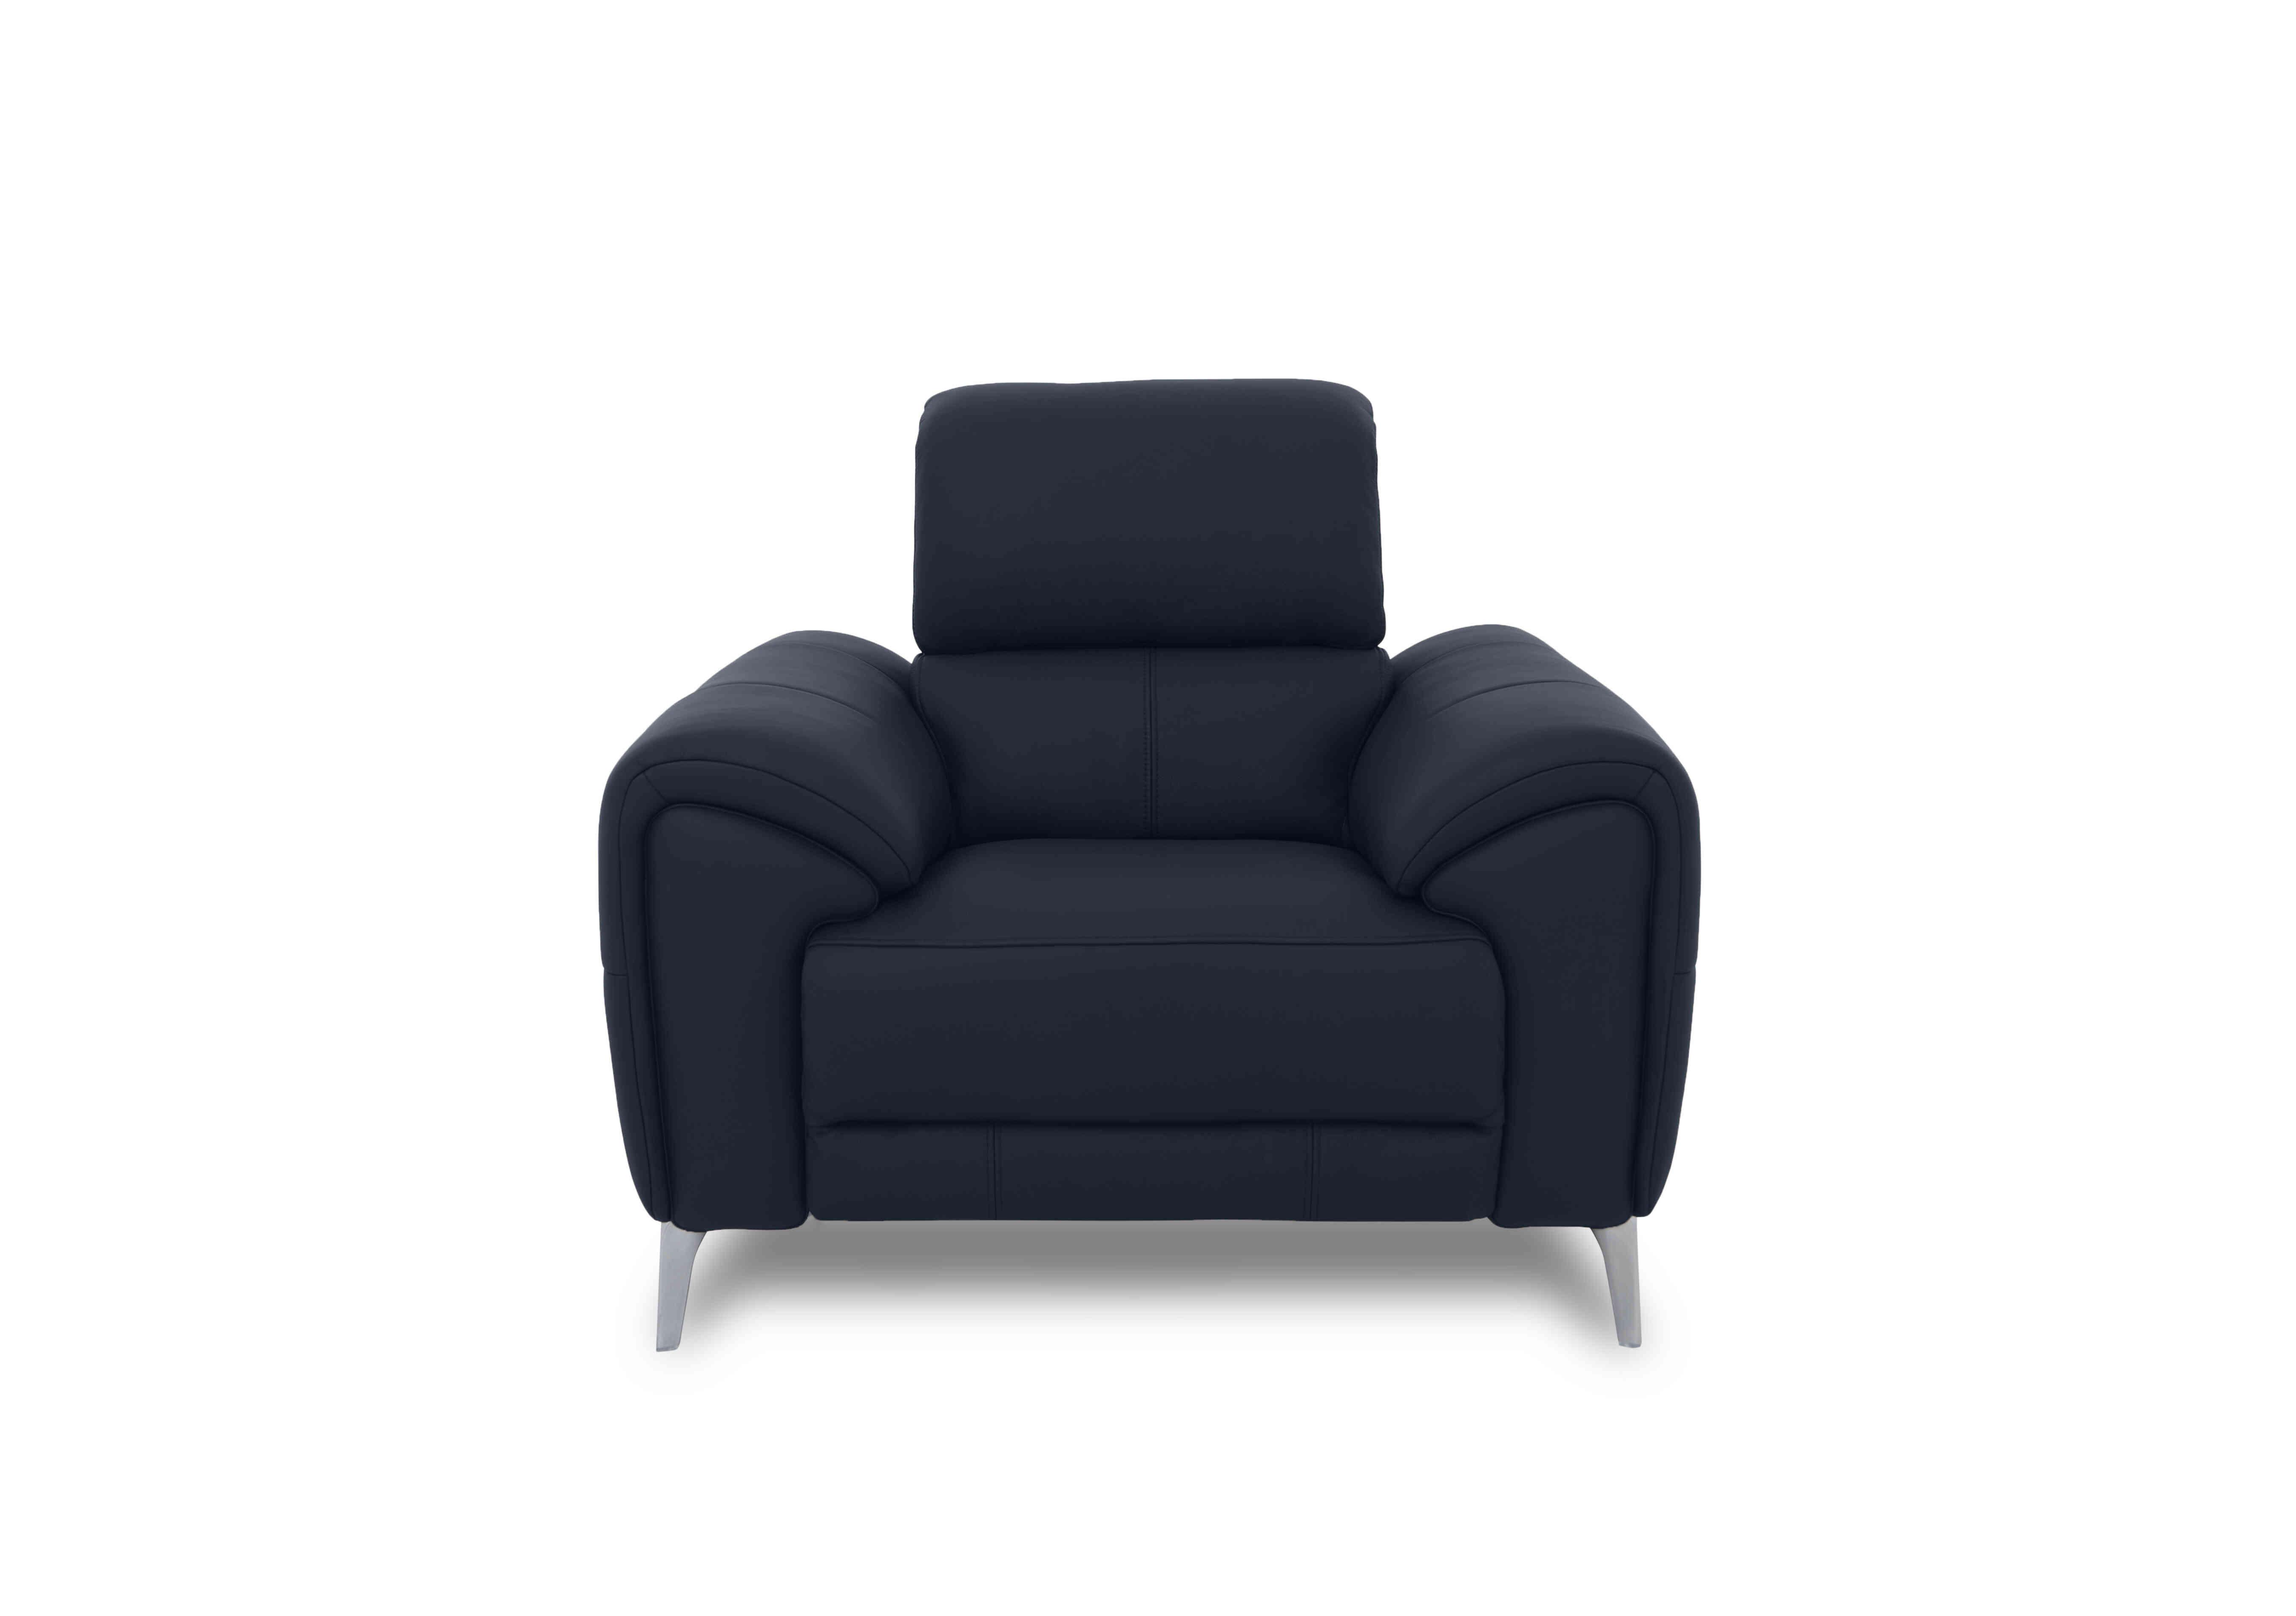 Vino Leather Power Recliner Chair with Power Headrest and Heated Seat in Cat-40/09 Peacock on Furniture Village